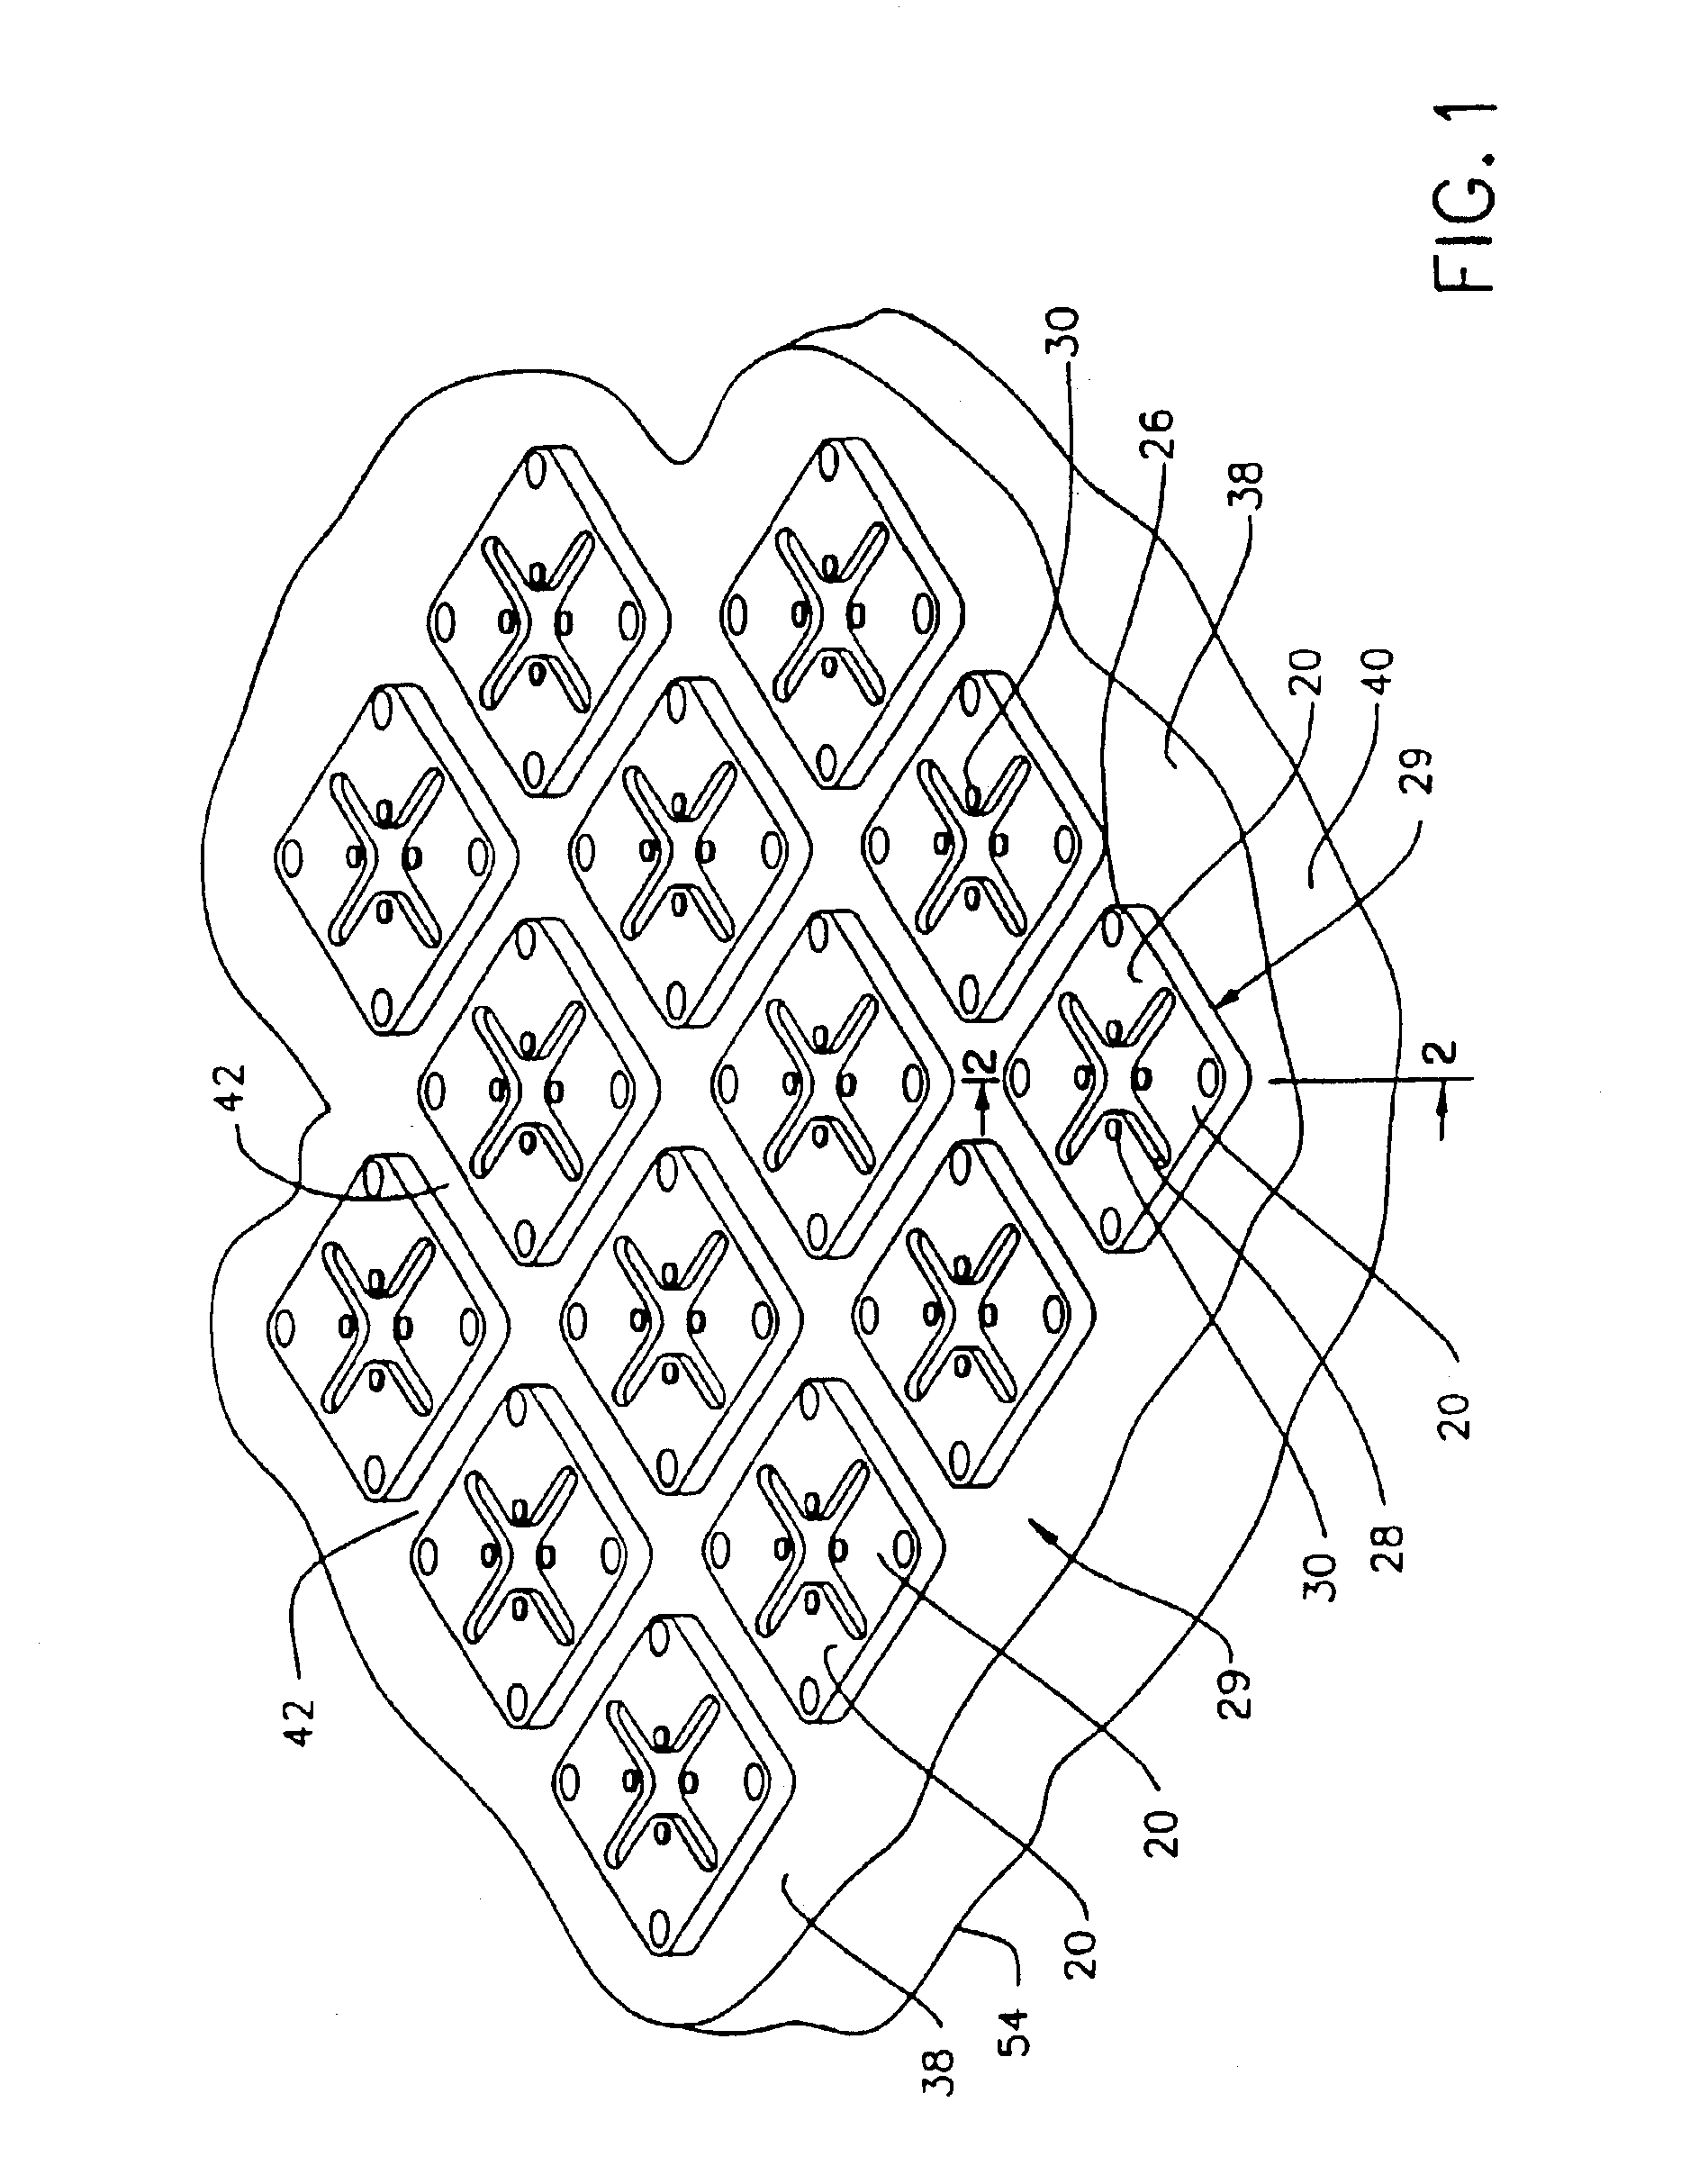 Method of making an electronic contact